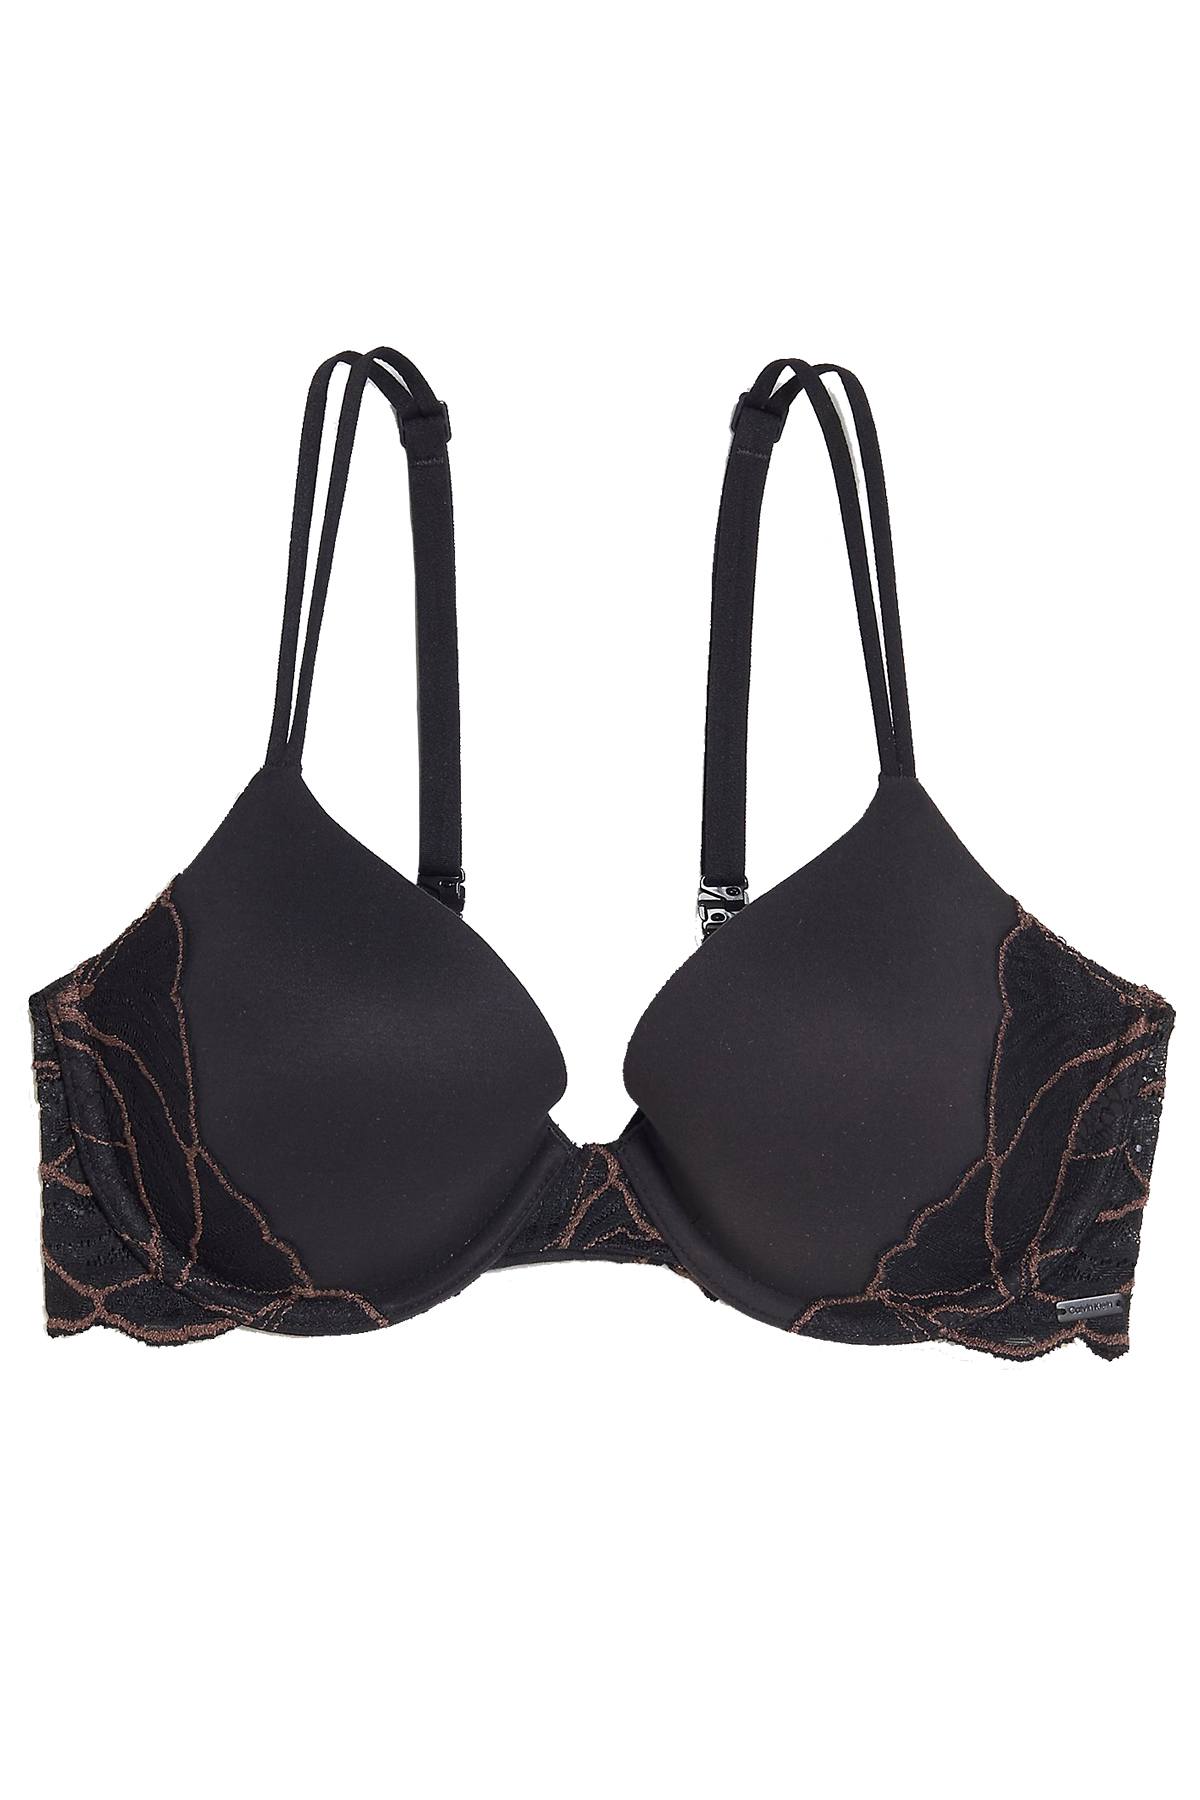 Calvin Klein Black Perfectly Fit Lightly Lined Full Coverage Bra